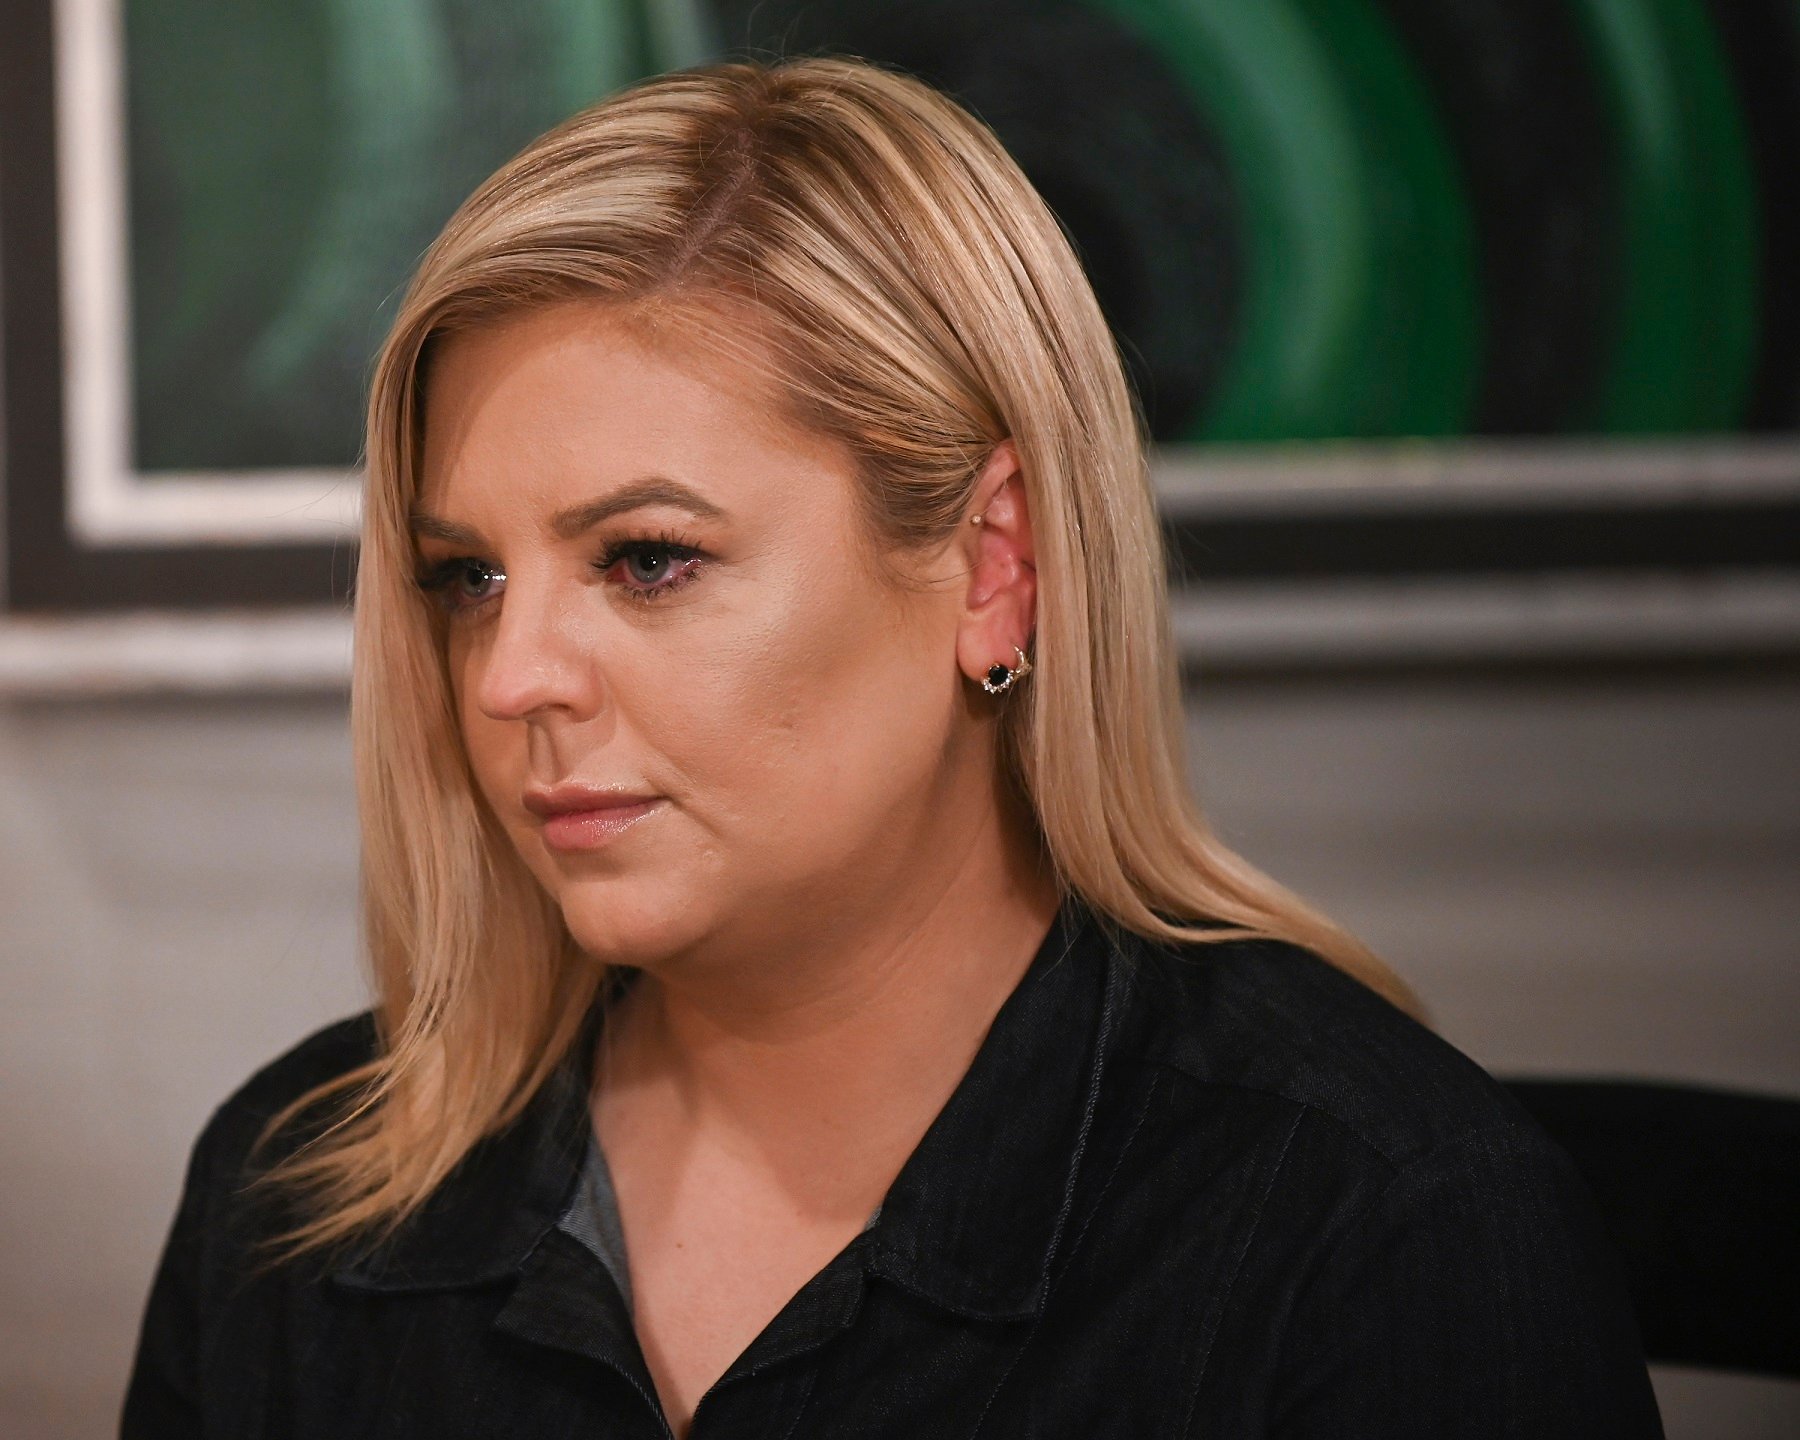 General Hospital this week focuses on Maxie, pictured here in a black shirt